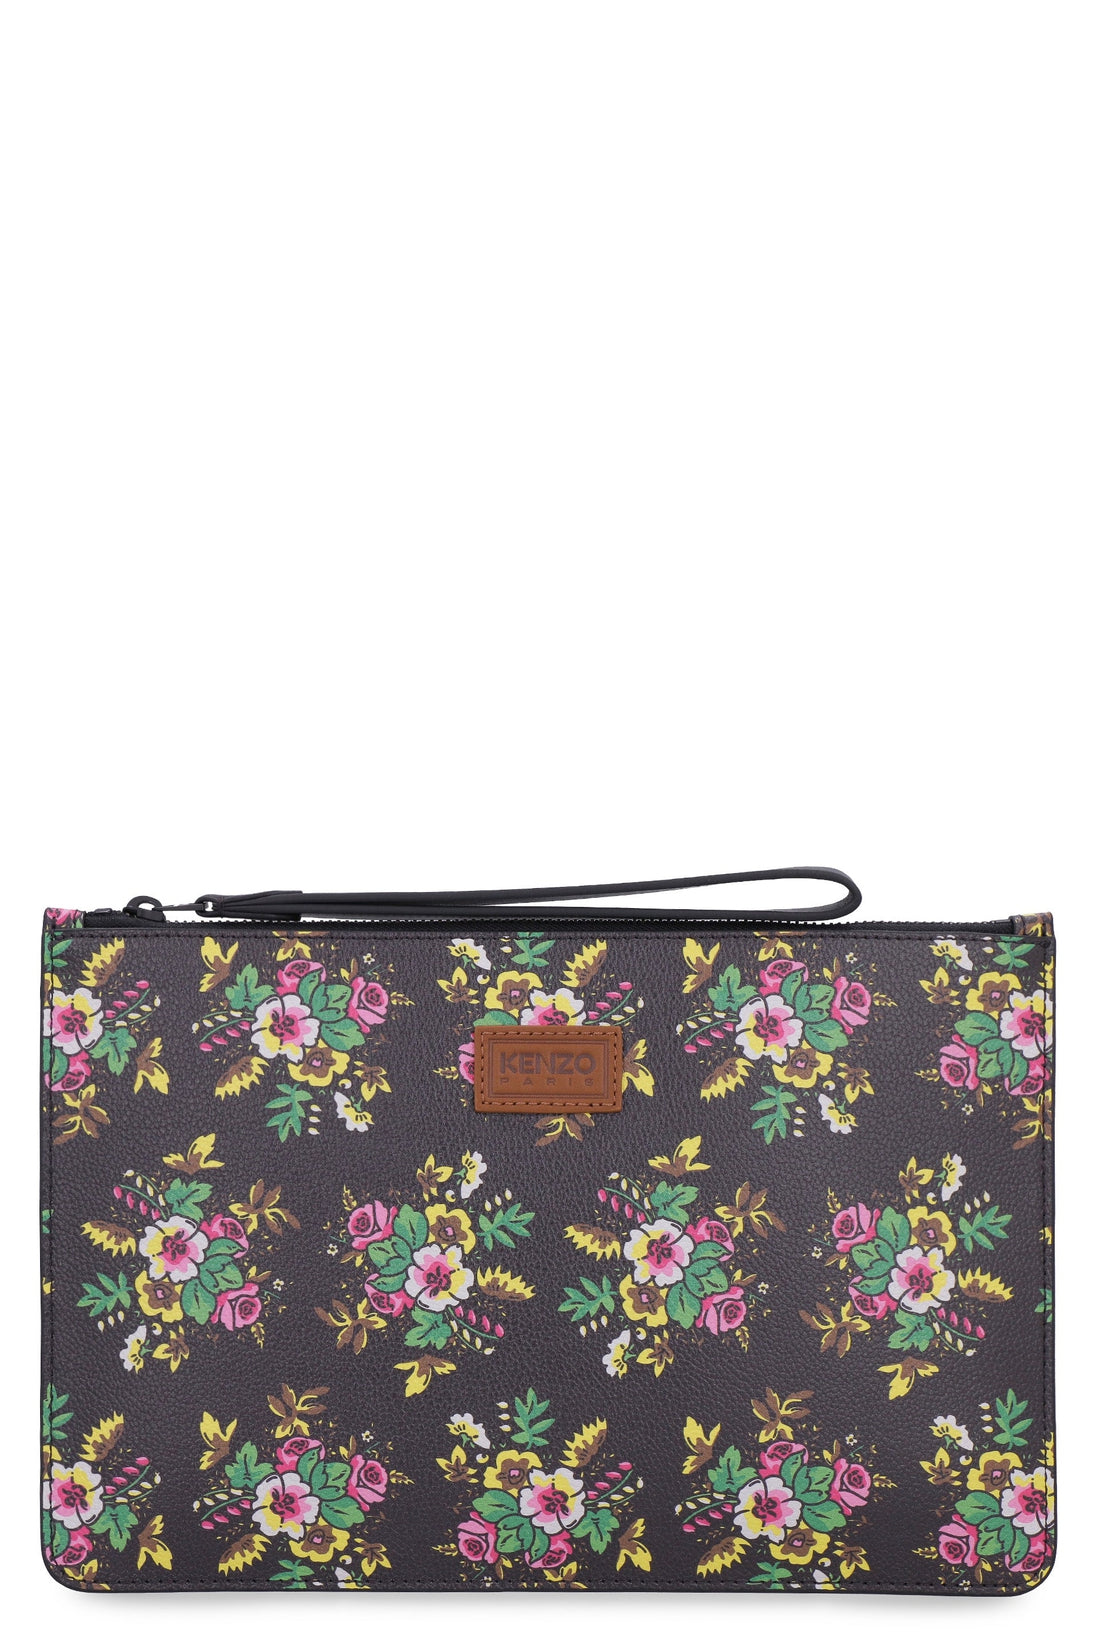 Kenzo-OUTLET-SALE-Printed leather clutch-ARCHIVIST